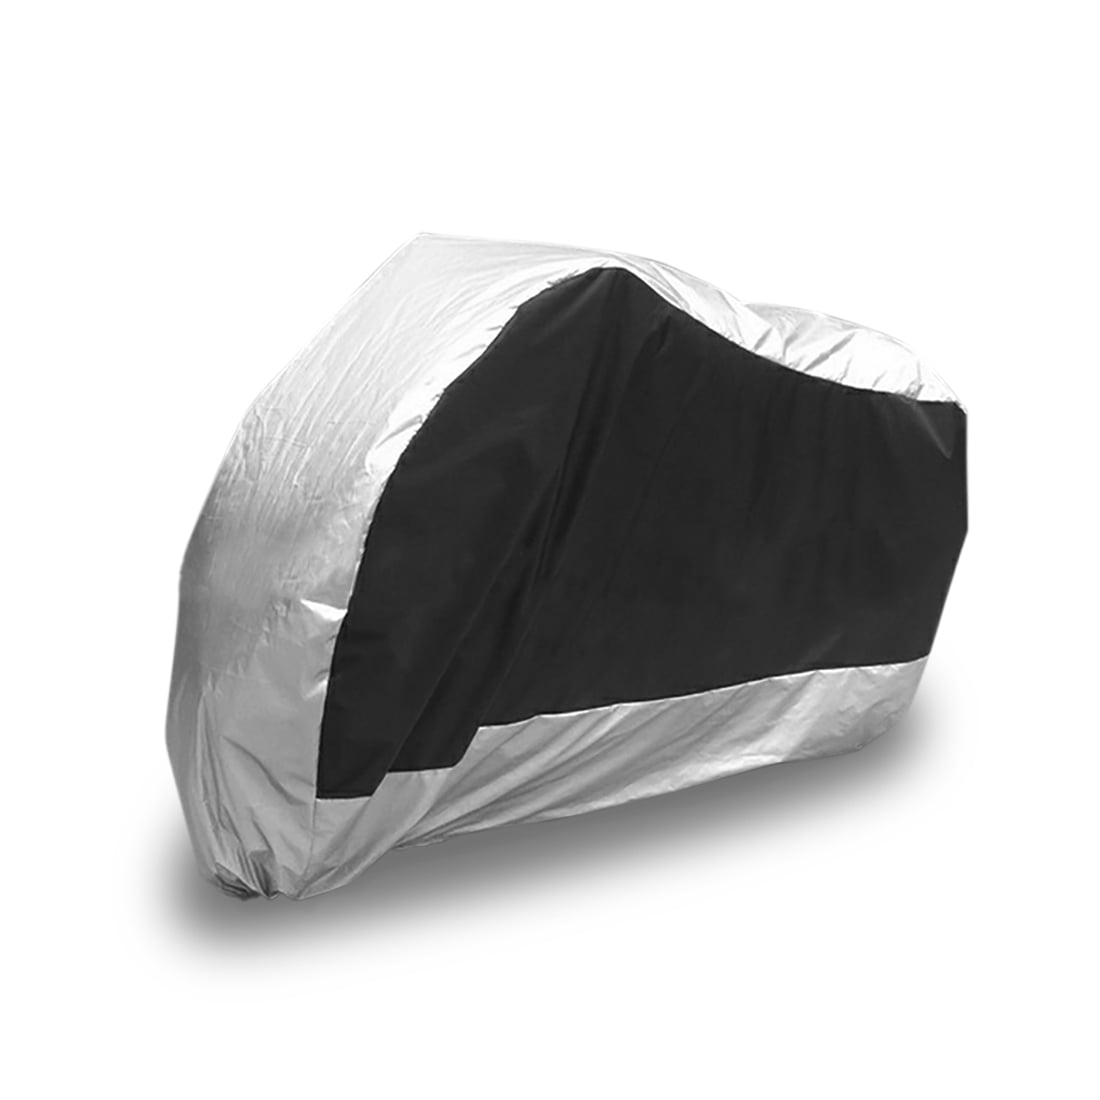 XL Motorcycle Bike Cover Waterproof For Harley Davidson Fatboy Softail Sportster 